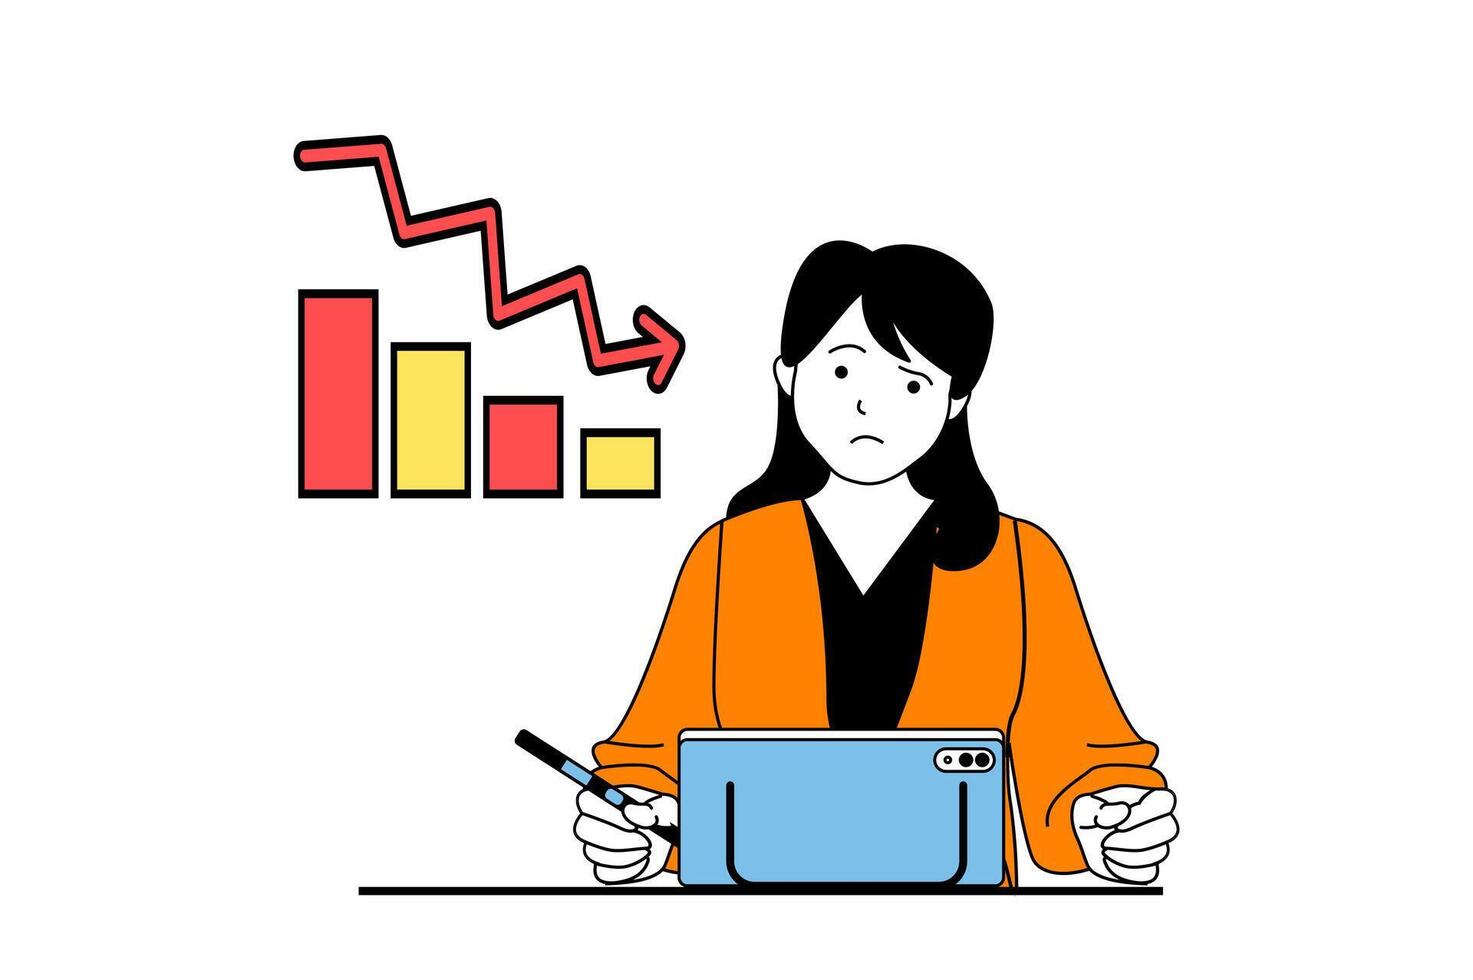 Crisis management concept with people scene in flat web design. Woman losing her money and getting financial reduction and problems. Vector illustration for social media banner, marketing material.